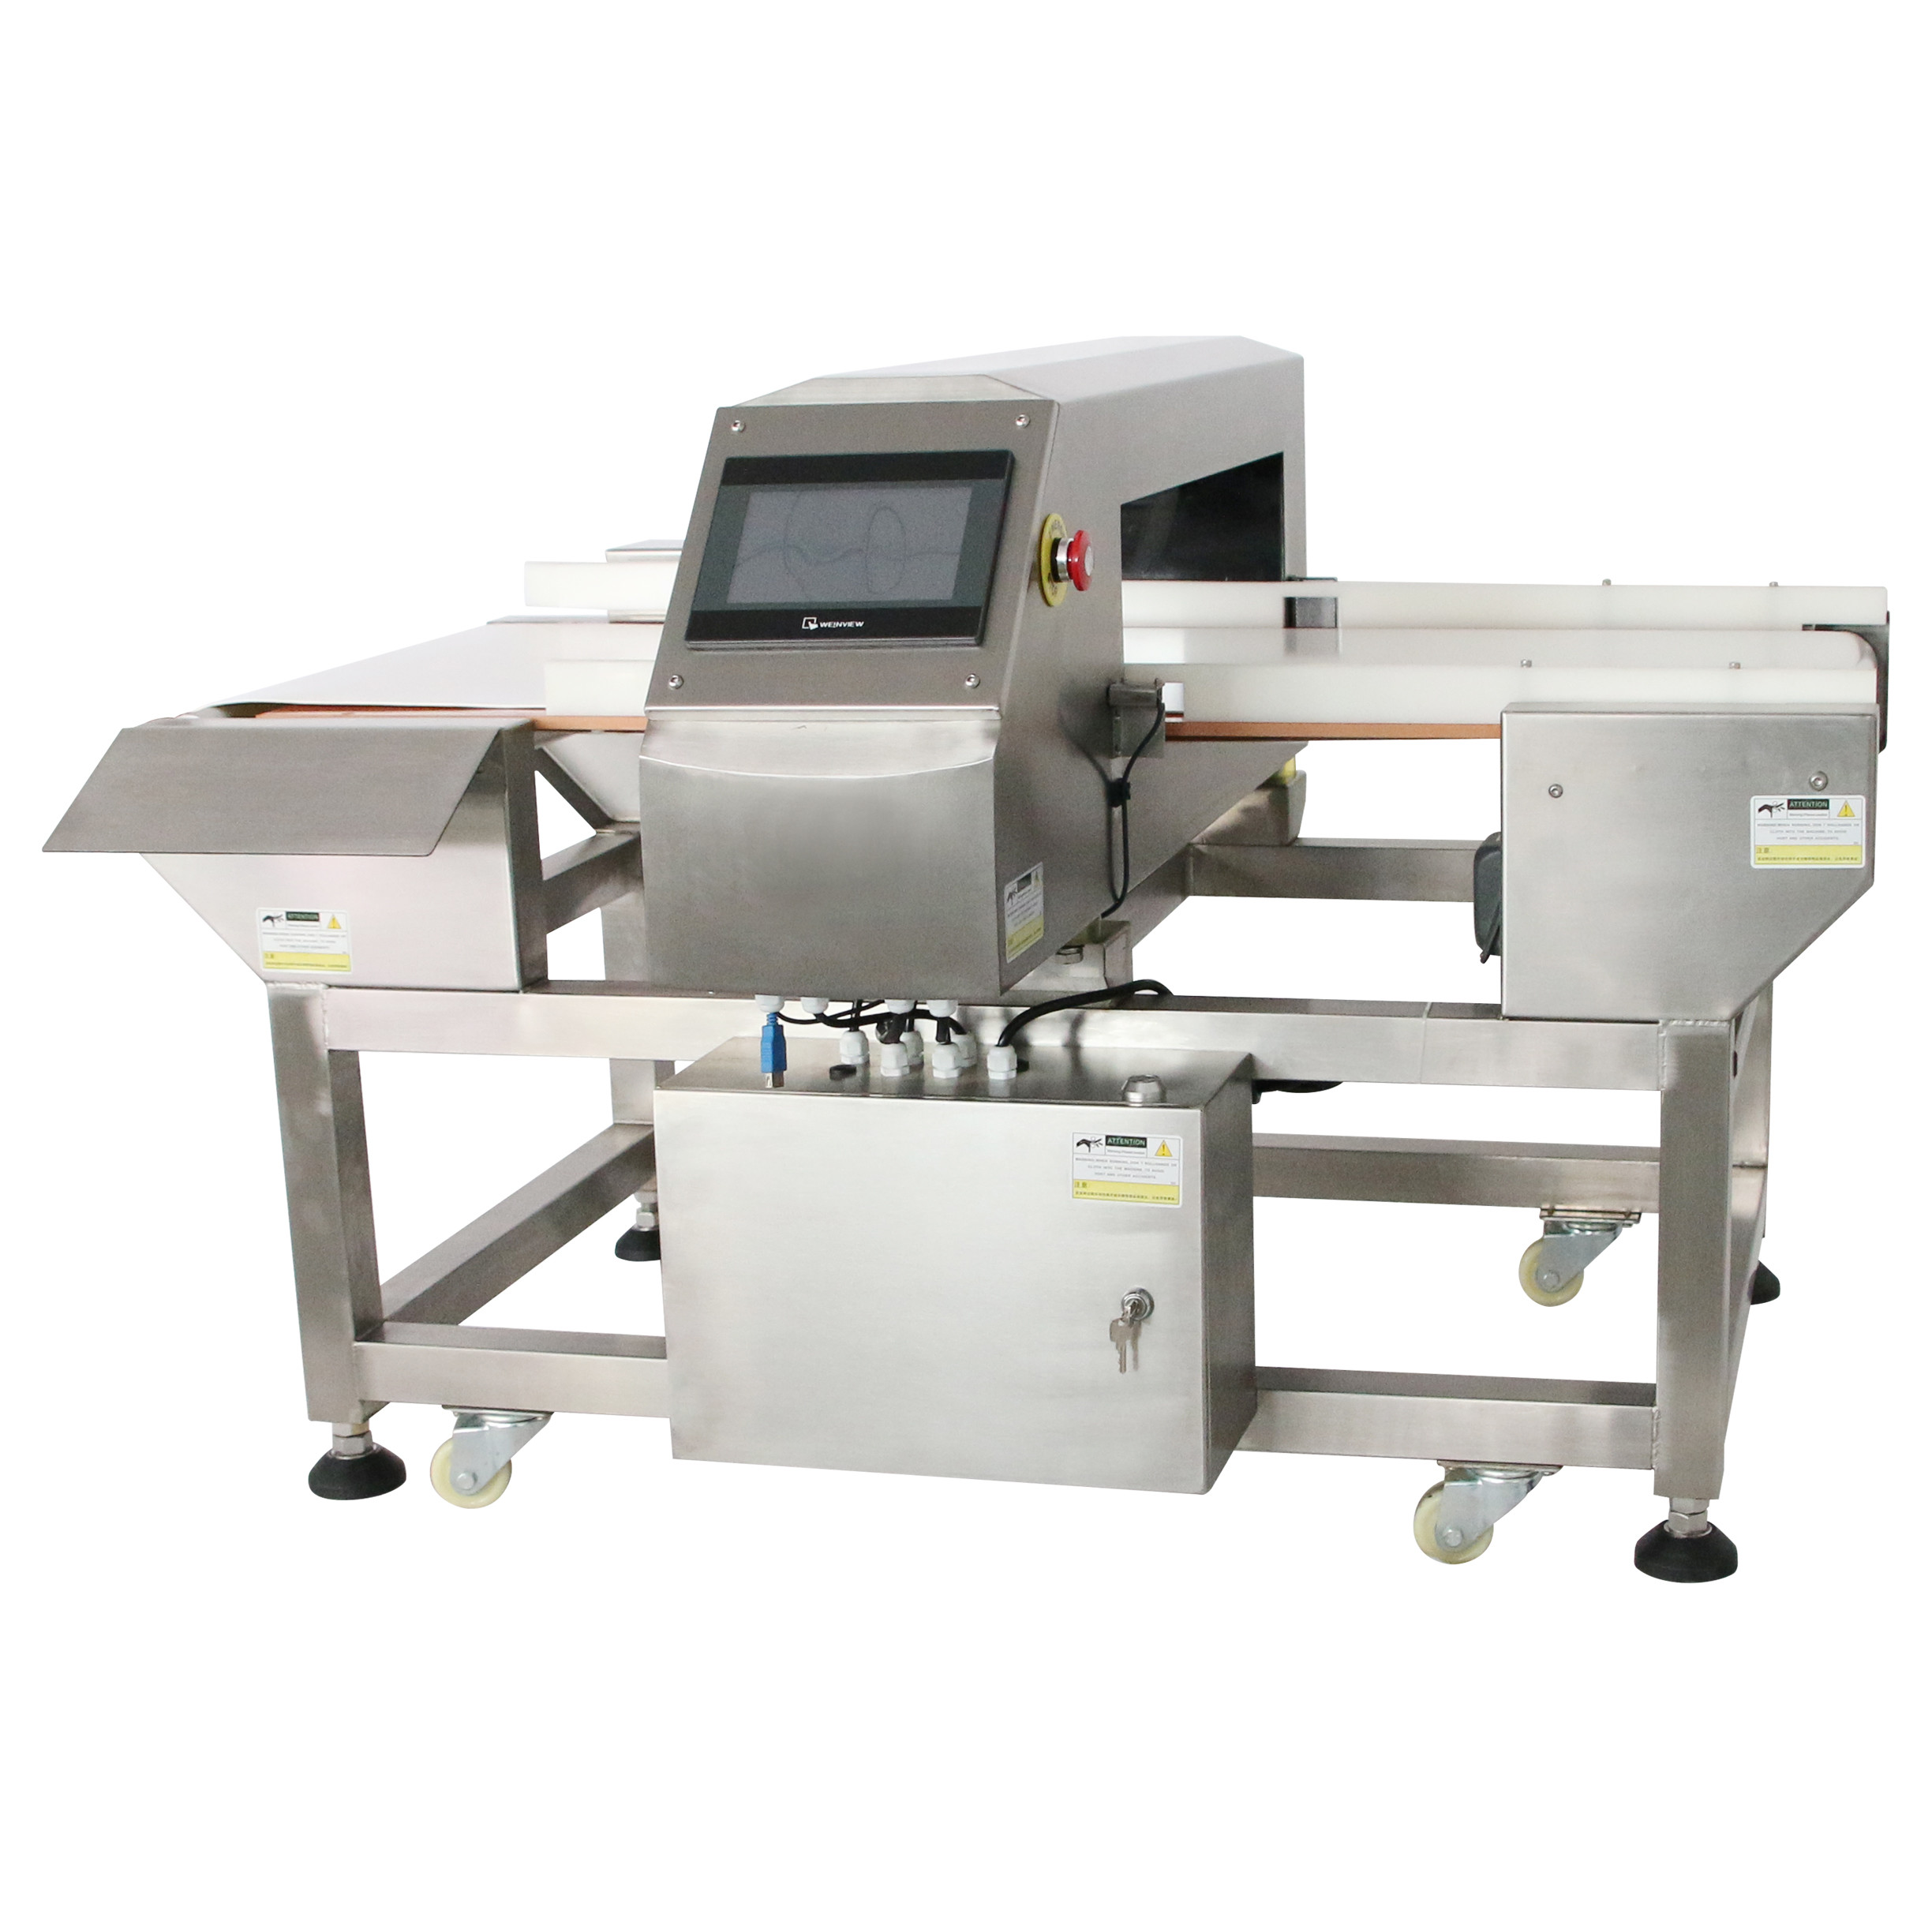 China FDA Metal Detection Standards / Food and drug metal detector / food metal detection system factory